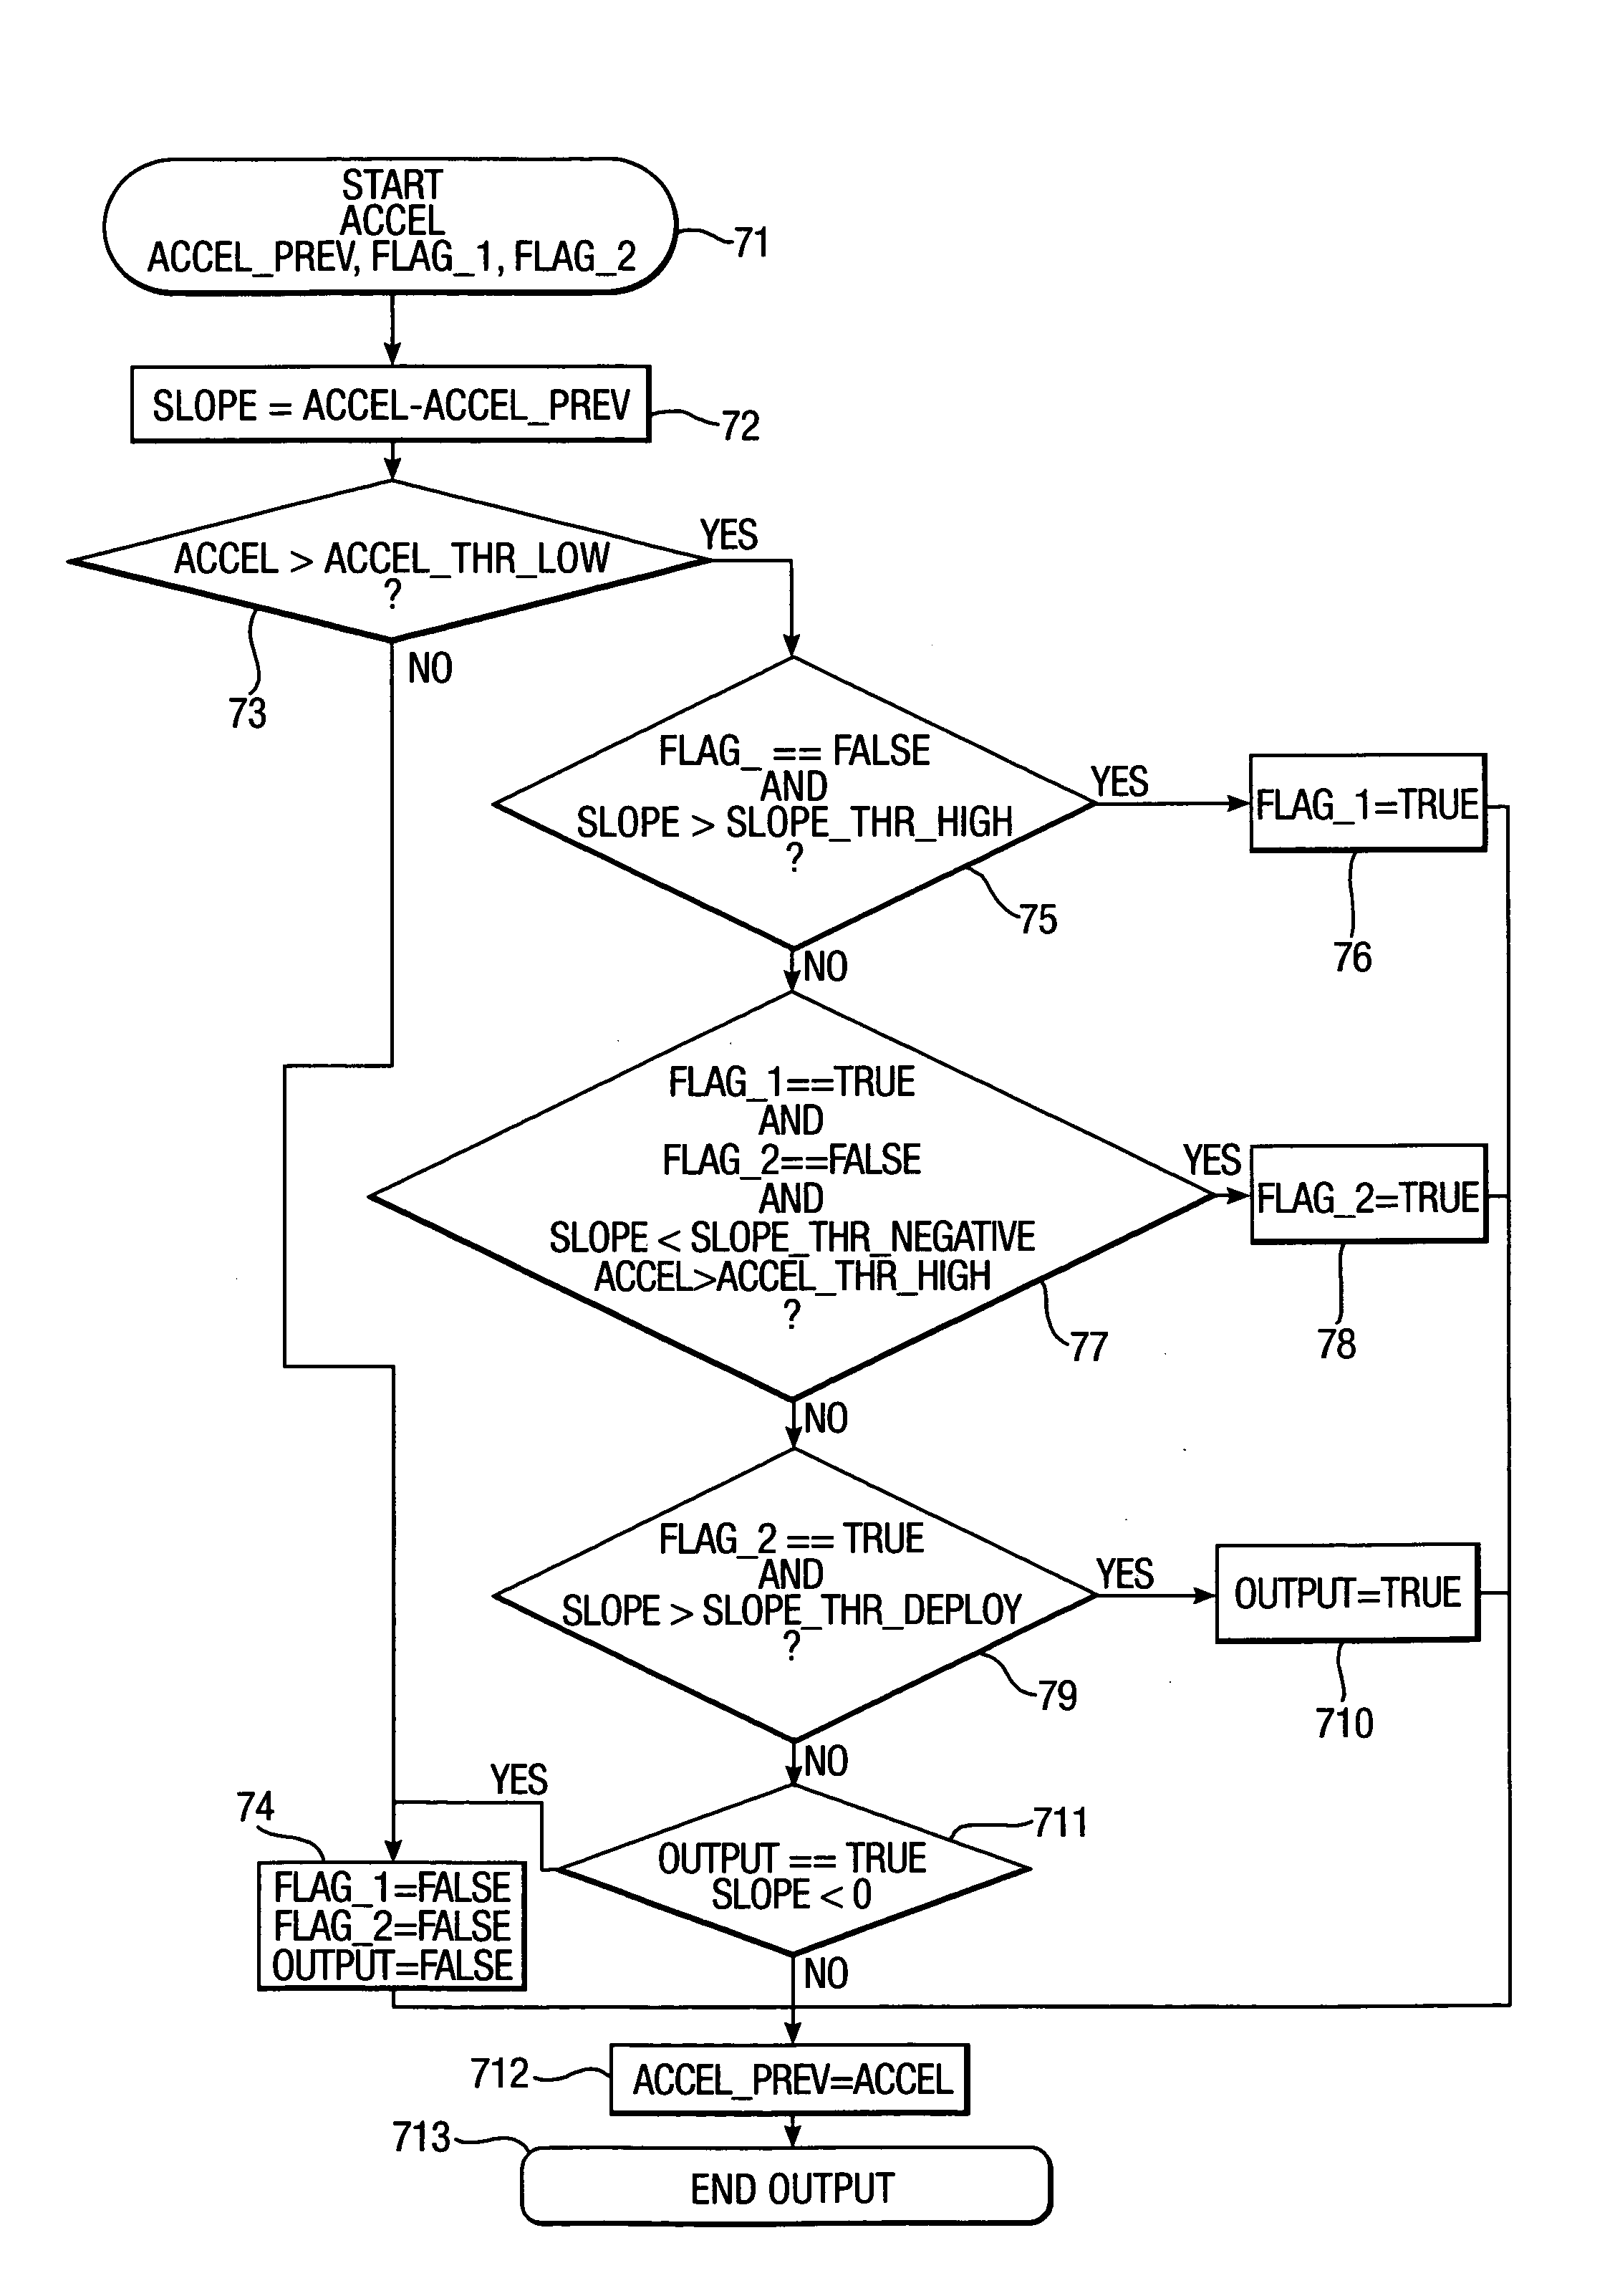 Method and system for detecting a vehicle rollover, in particular a soil trip rollover